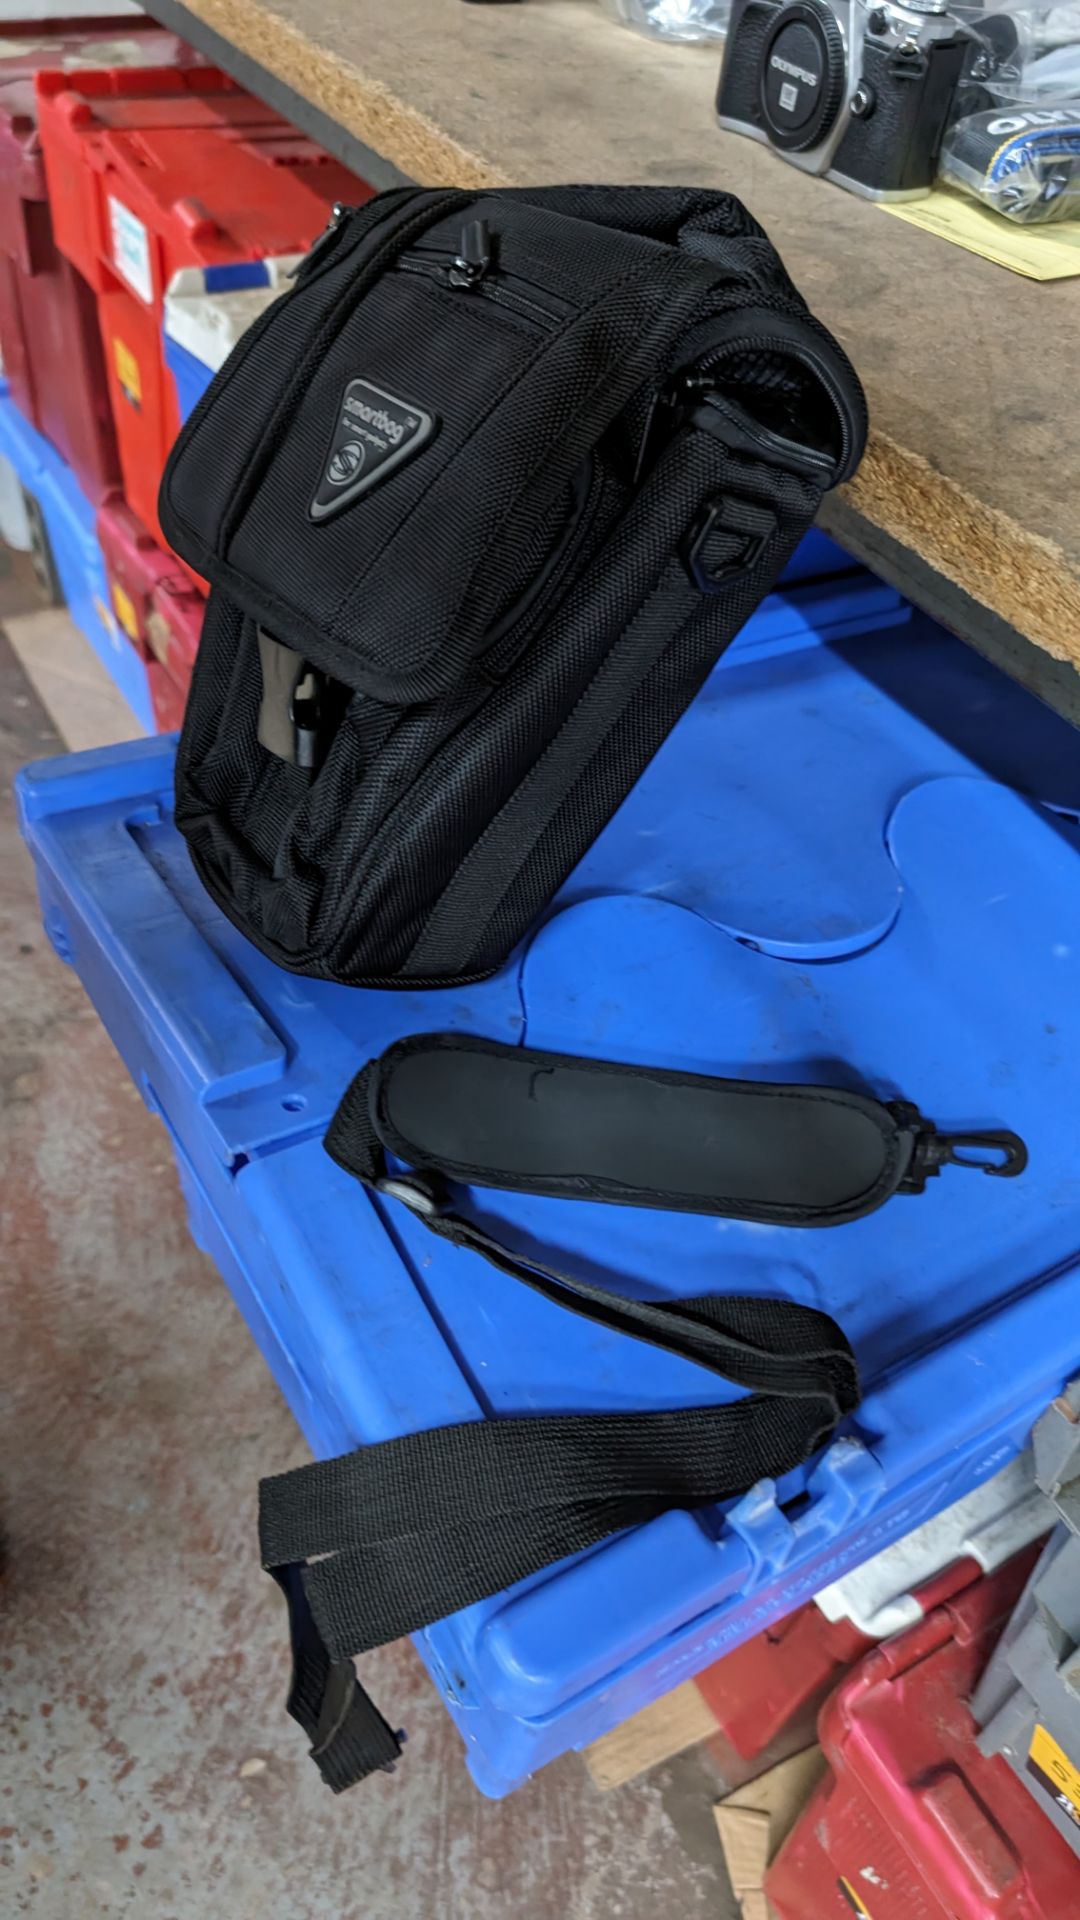 10 off camera bags, each including a strap - Image 5 of 5